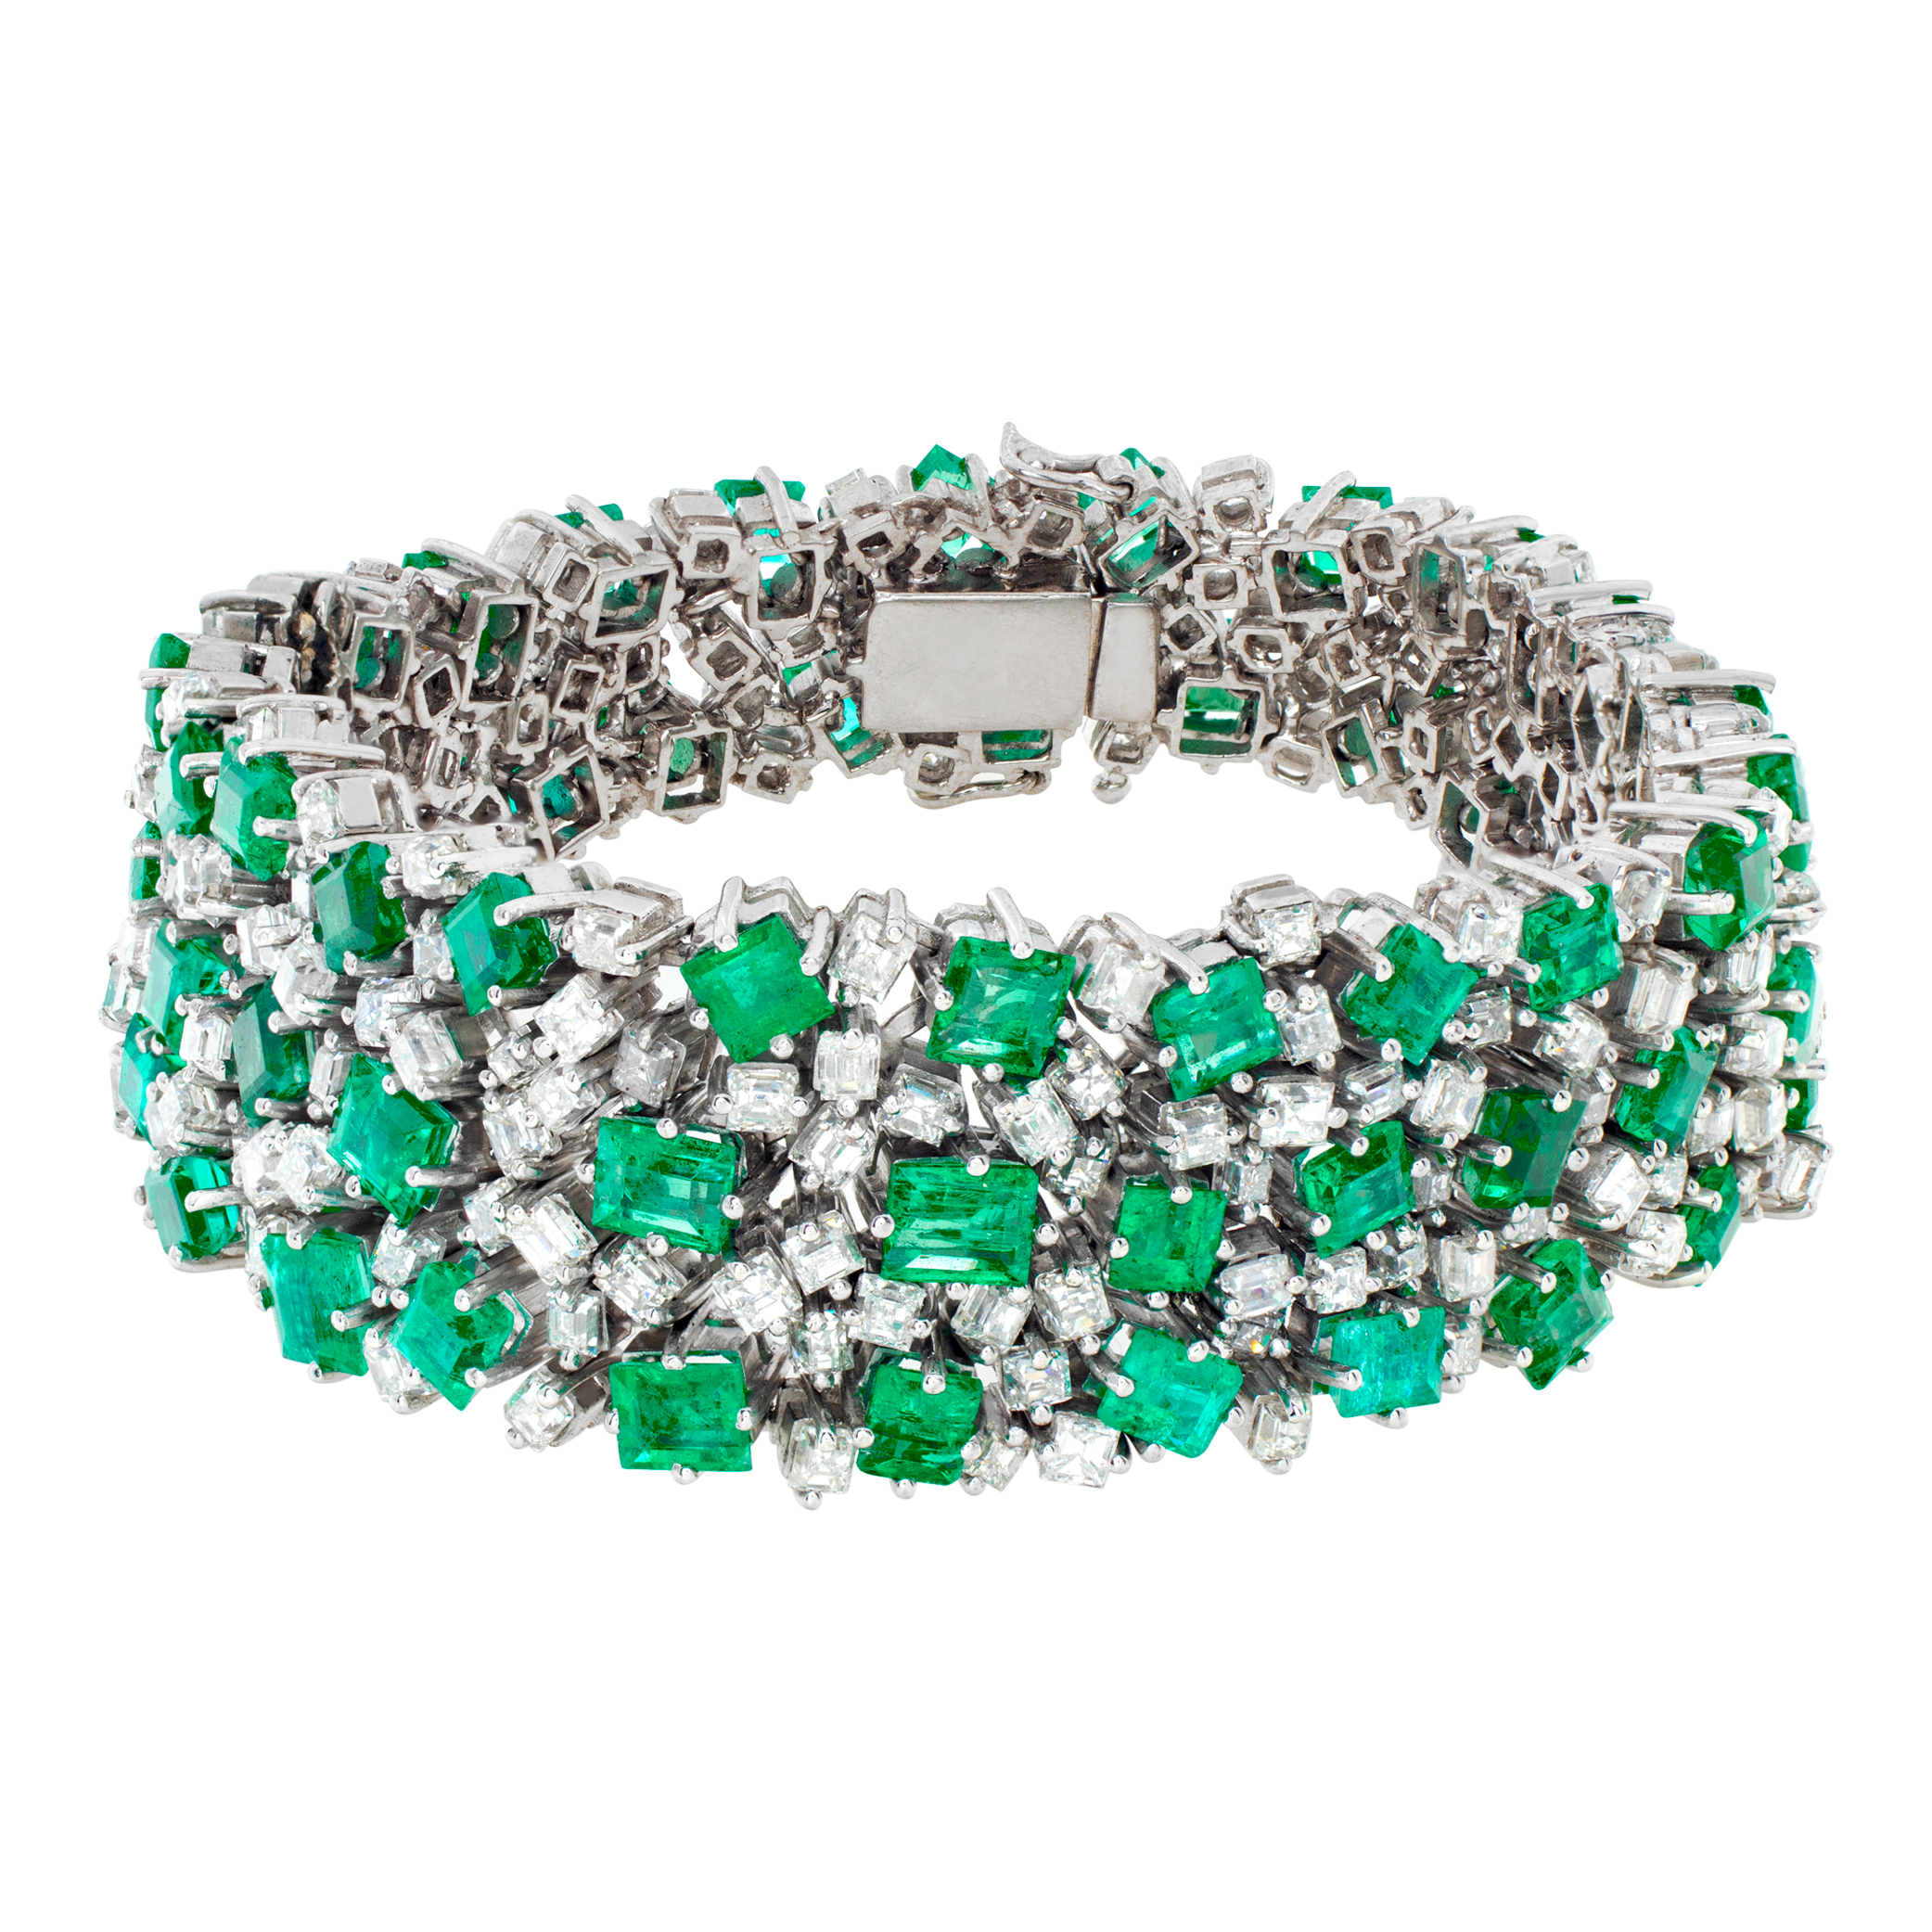 Vintage diamond and emerald platinum bracelet with over 17 carats in diamonds (H, VS) and 32 carats in Columbian emeralds. Length: 7 inches. Width tapers from 0.75 to 0.50 inches image 1